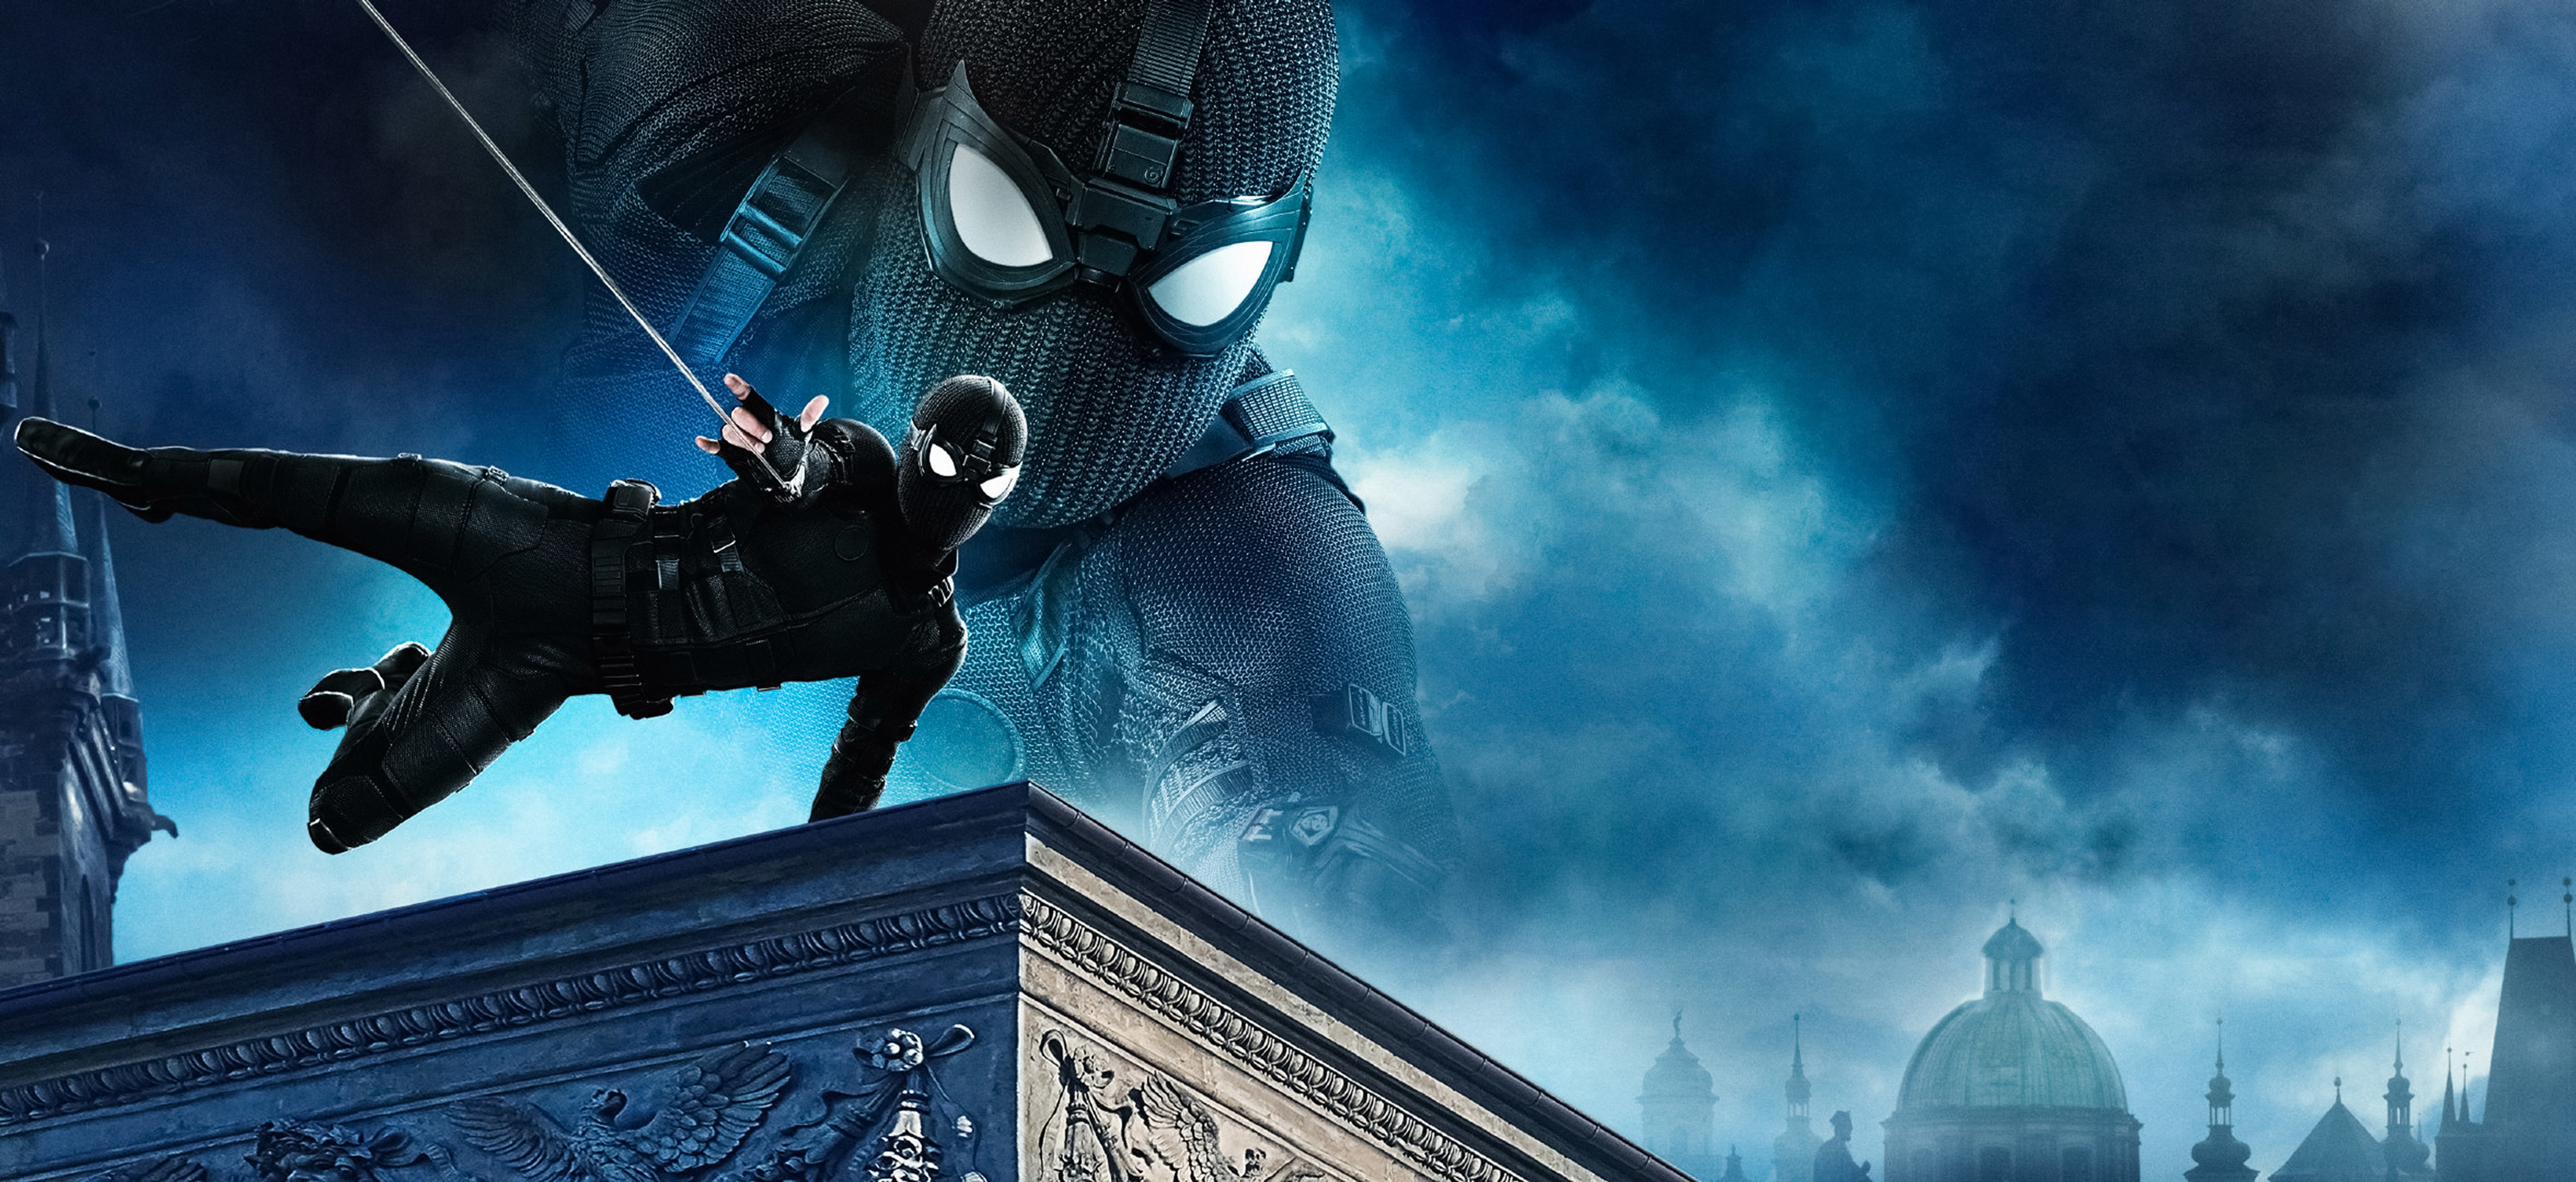 Spider Man Far From Home Poster 4k Wallpaper Hd Movies 4k Wallpapers Images Photos And Background